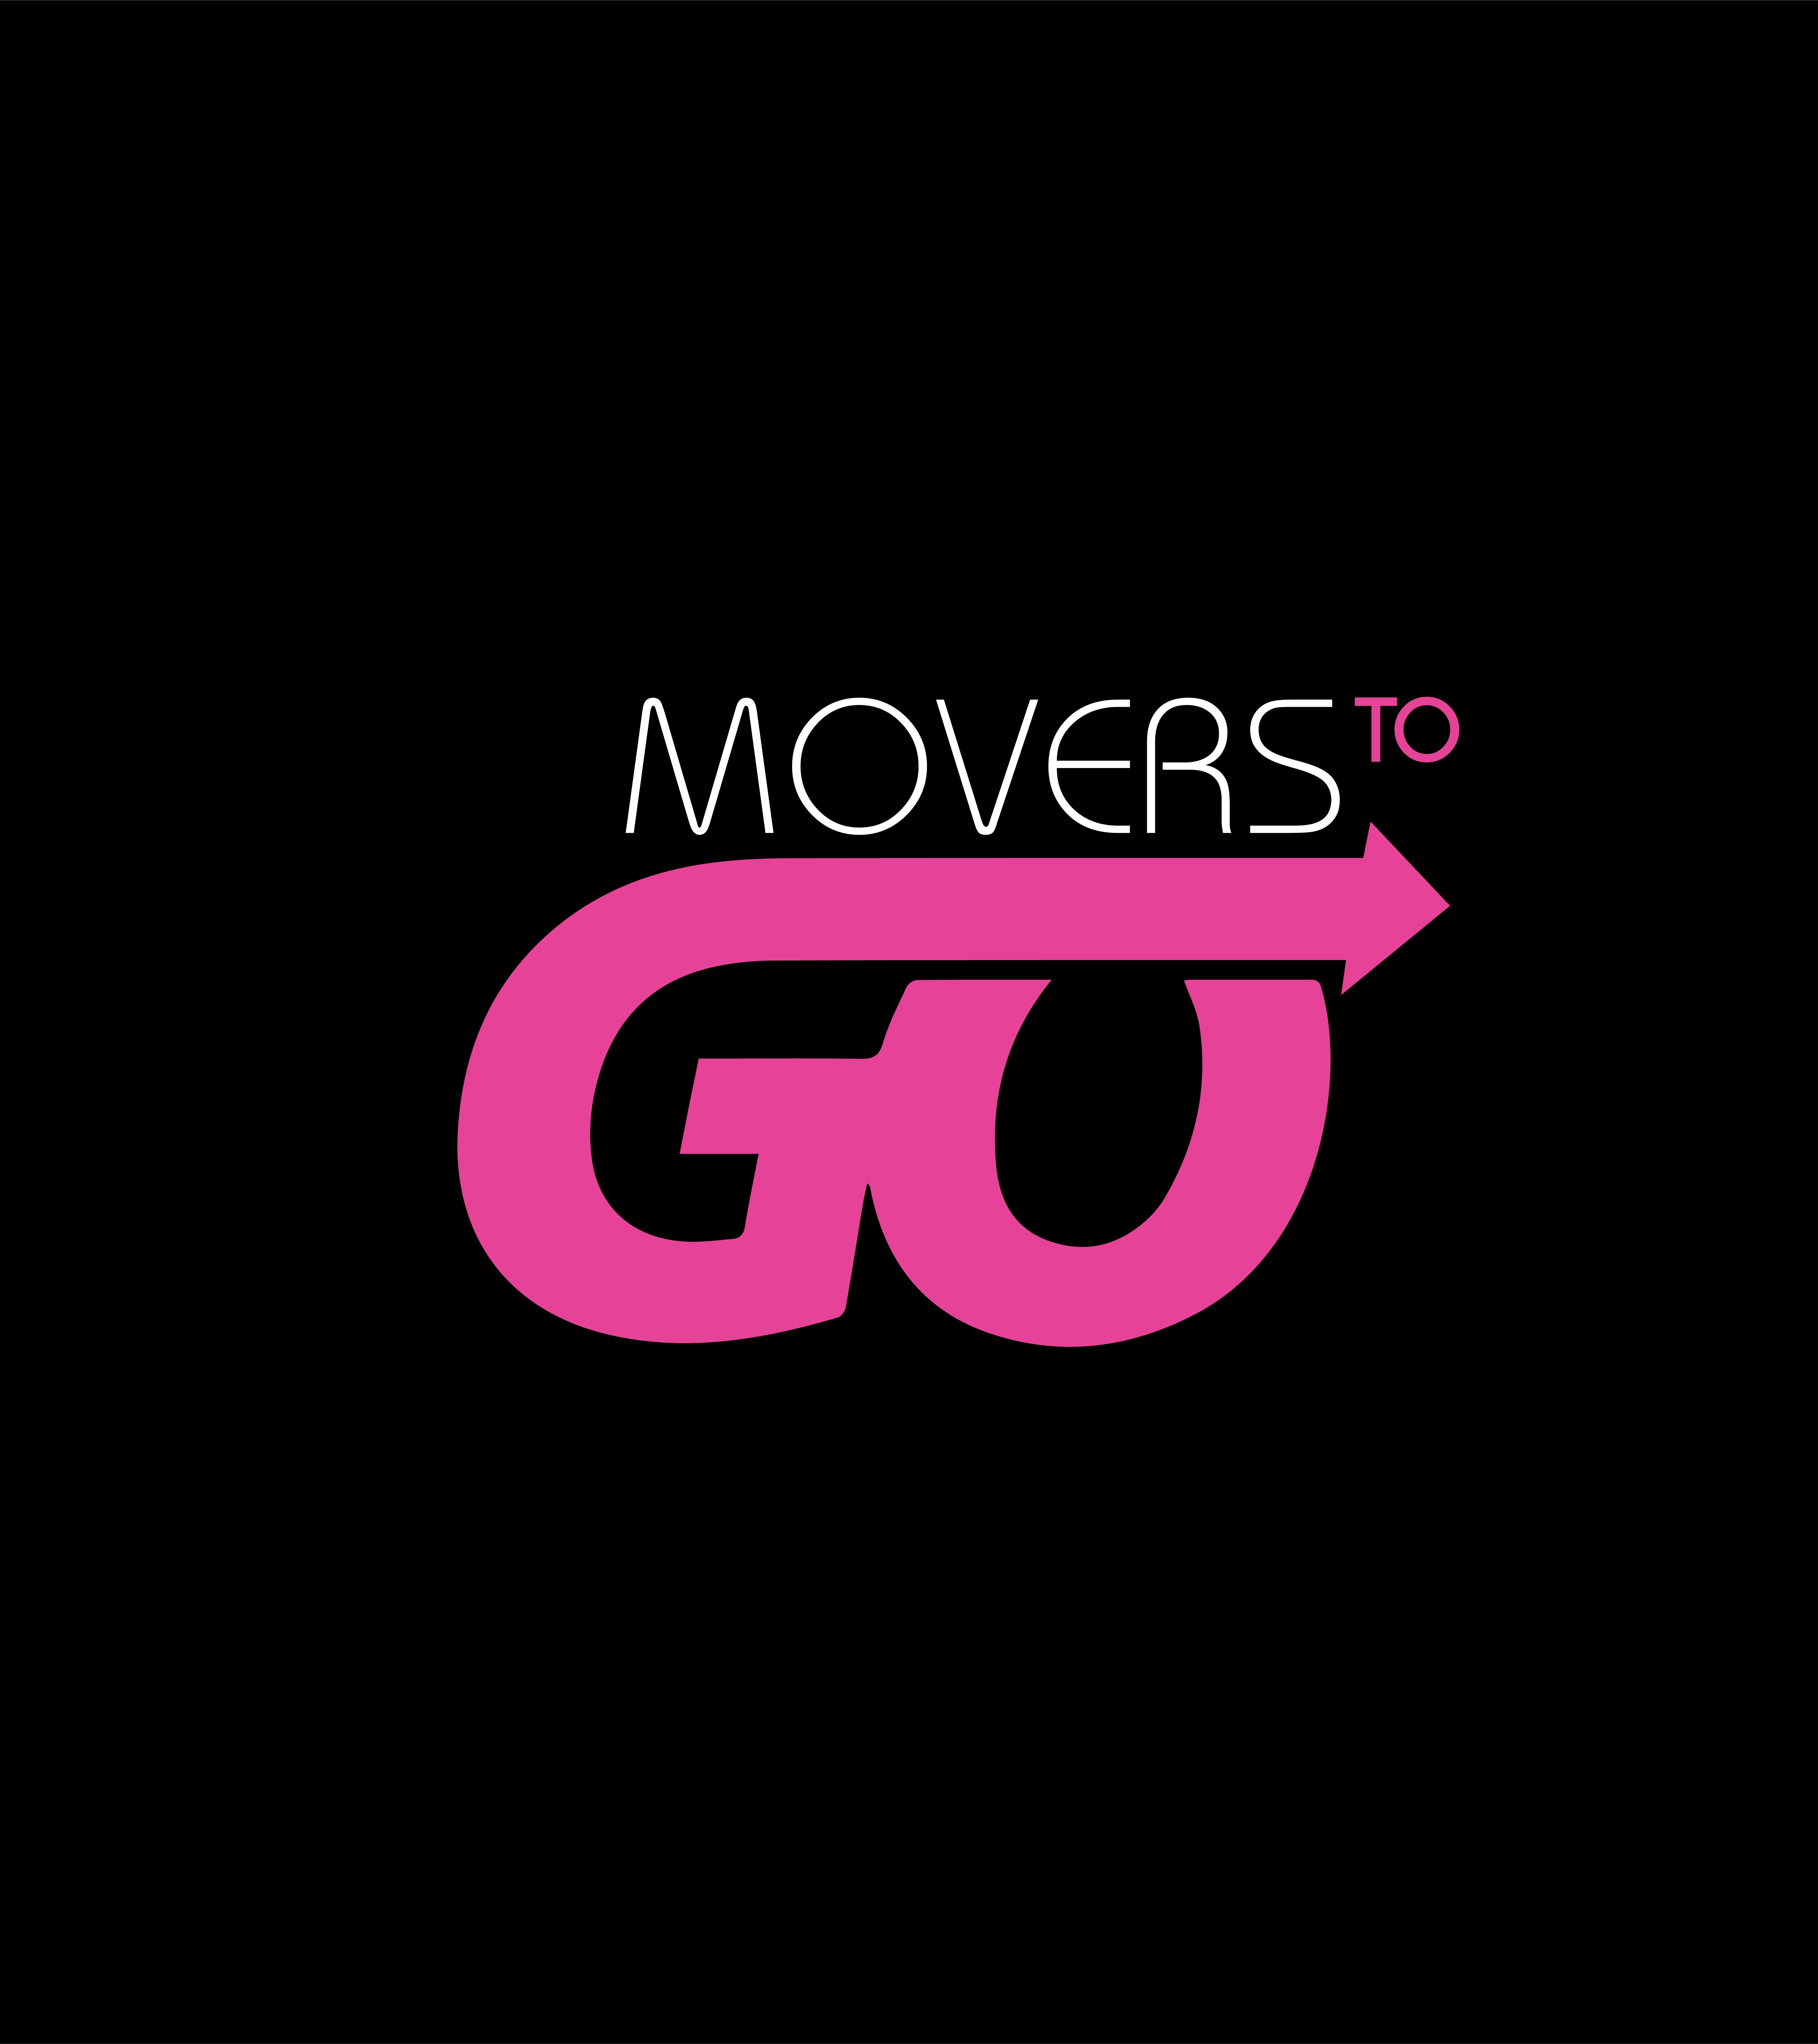 Movers To Go